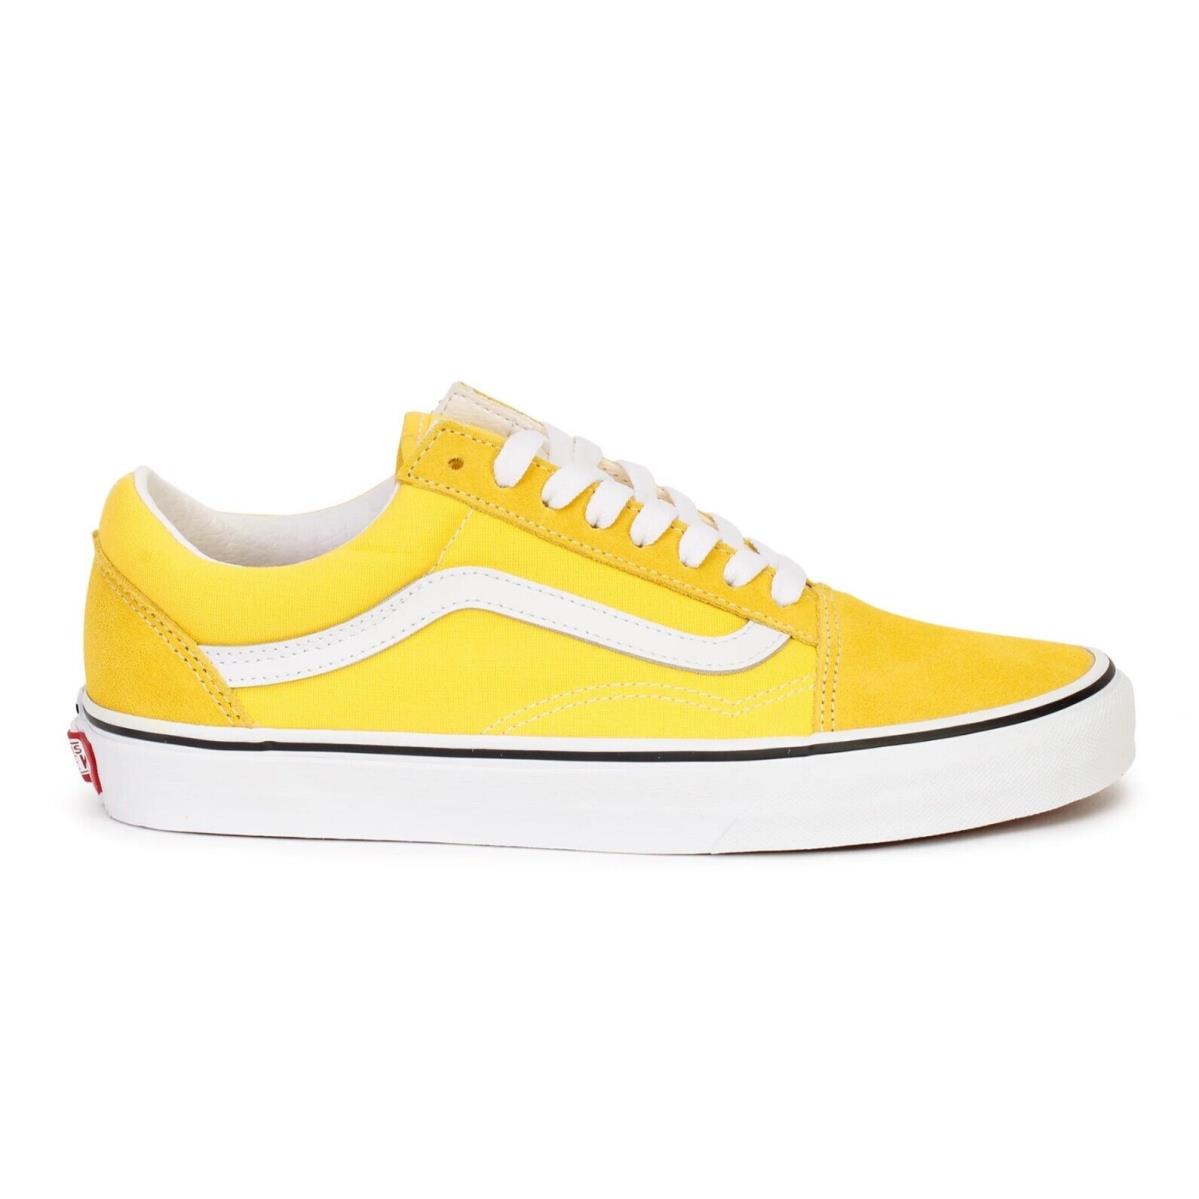 Vans Old Skool Unisex Shoes Cyber Yellow/white - Cyber Yellow/White